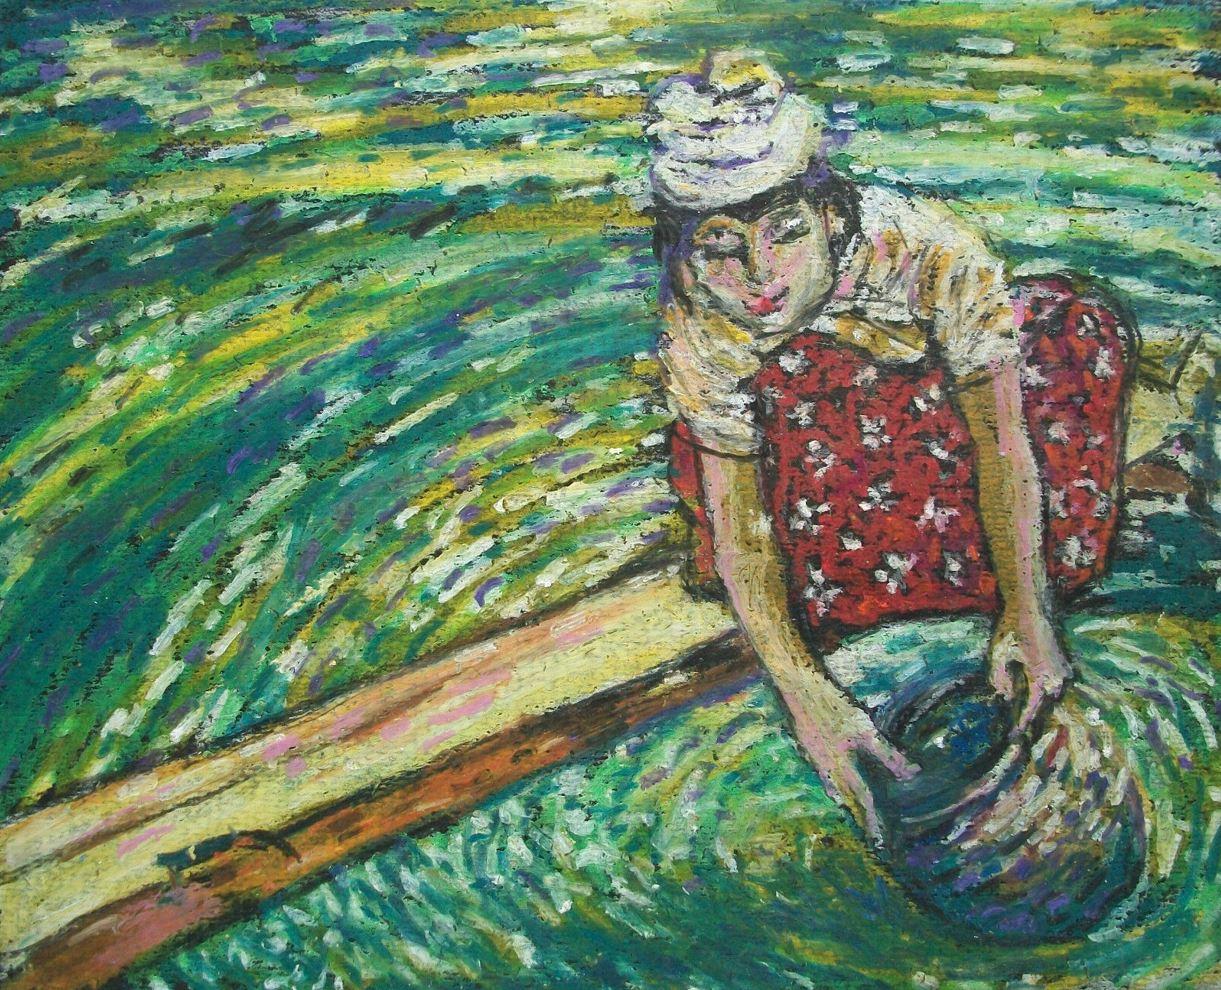 AUNG KHIN (1921-1996) Attributed - Vintage Impressionist style oil pastel and graphite drawing on black paper - featuring a young a Burmese girl perched on a plank collecting water - the vibrant surrounding greenery captured in the swirling pattern